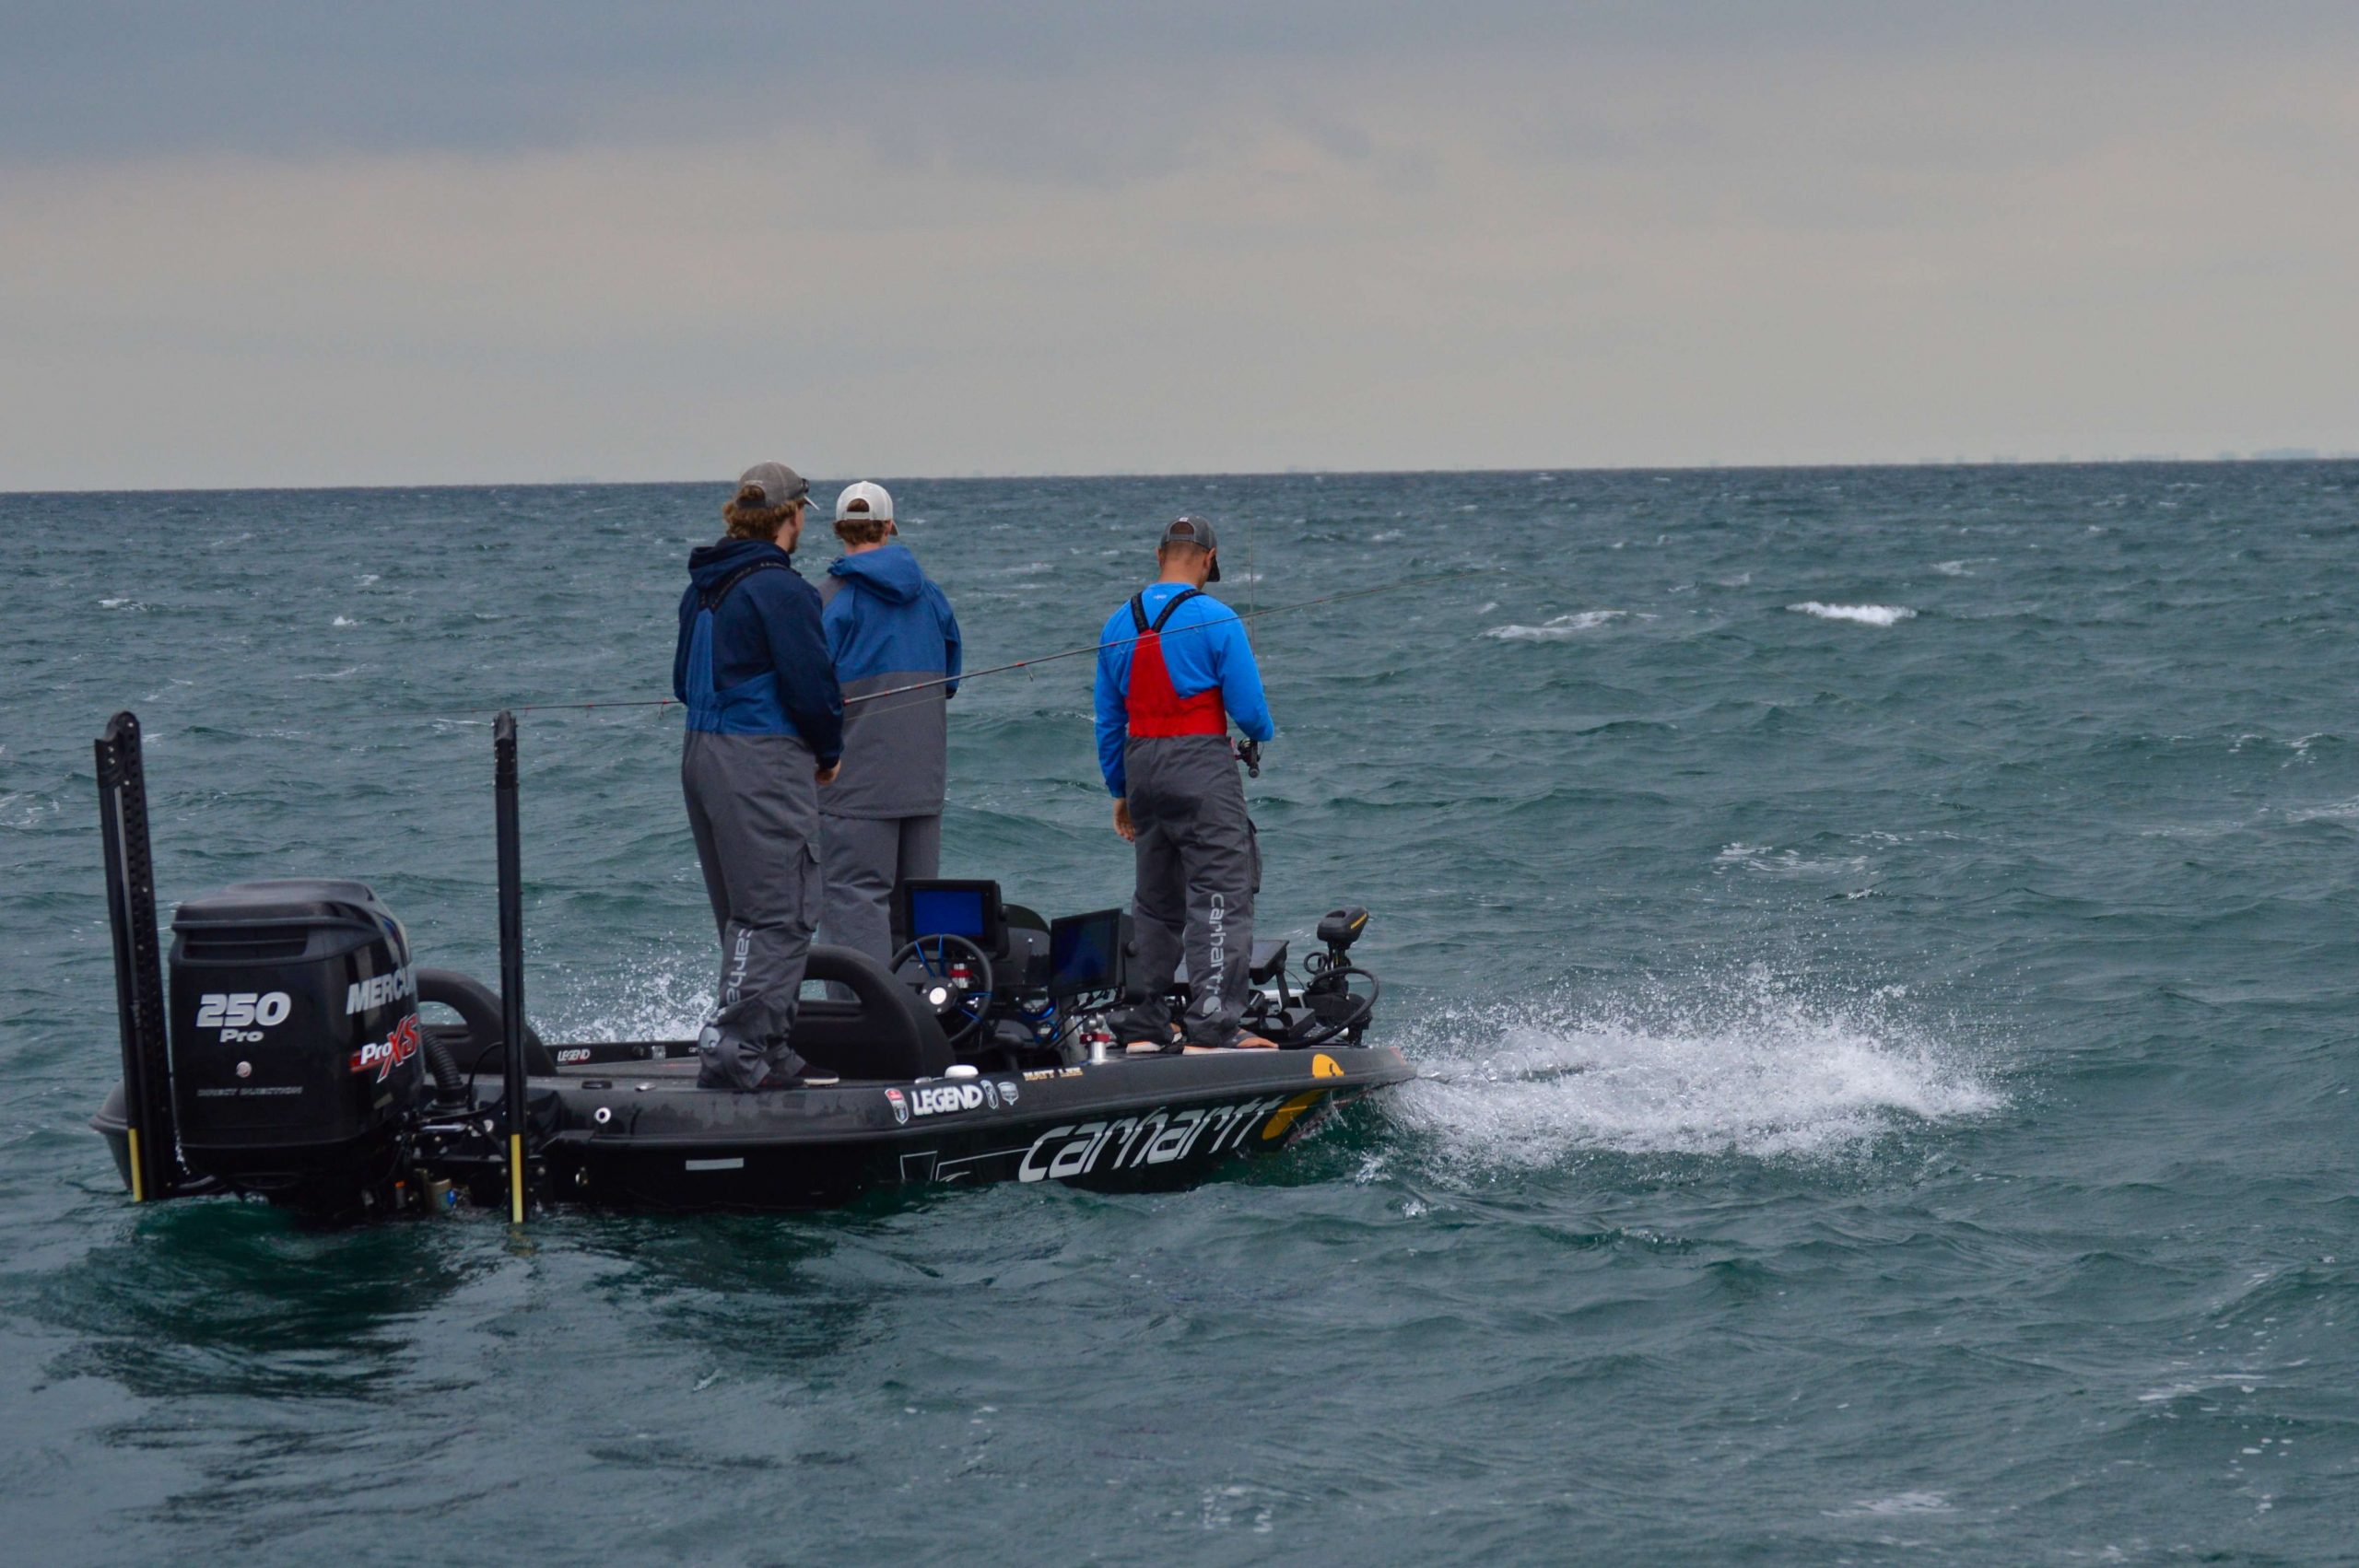 The waves didnât let up and forced the anglers to Out Work Them All. The following series of photos captures one fish the anglers worked especially hard for.
